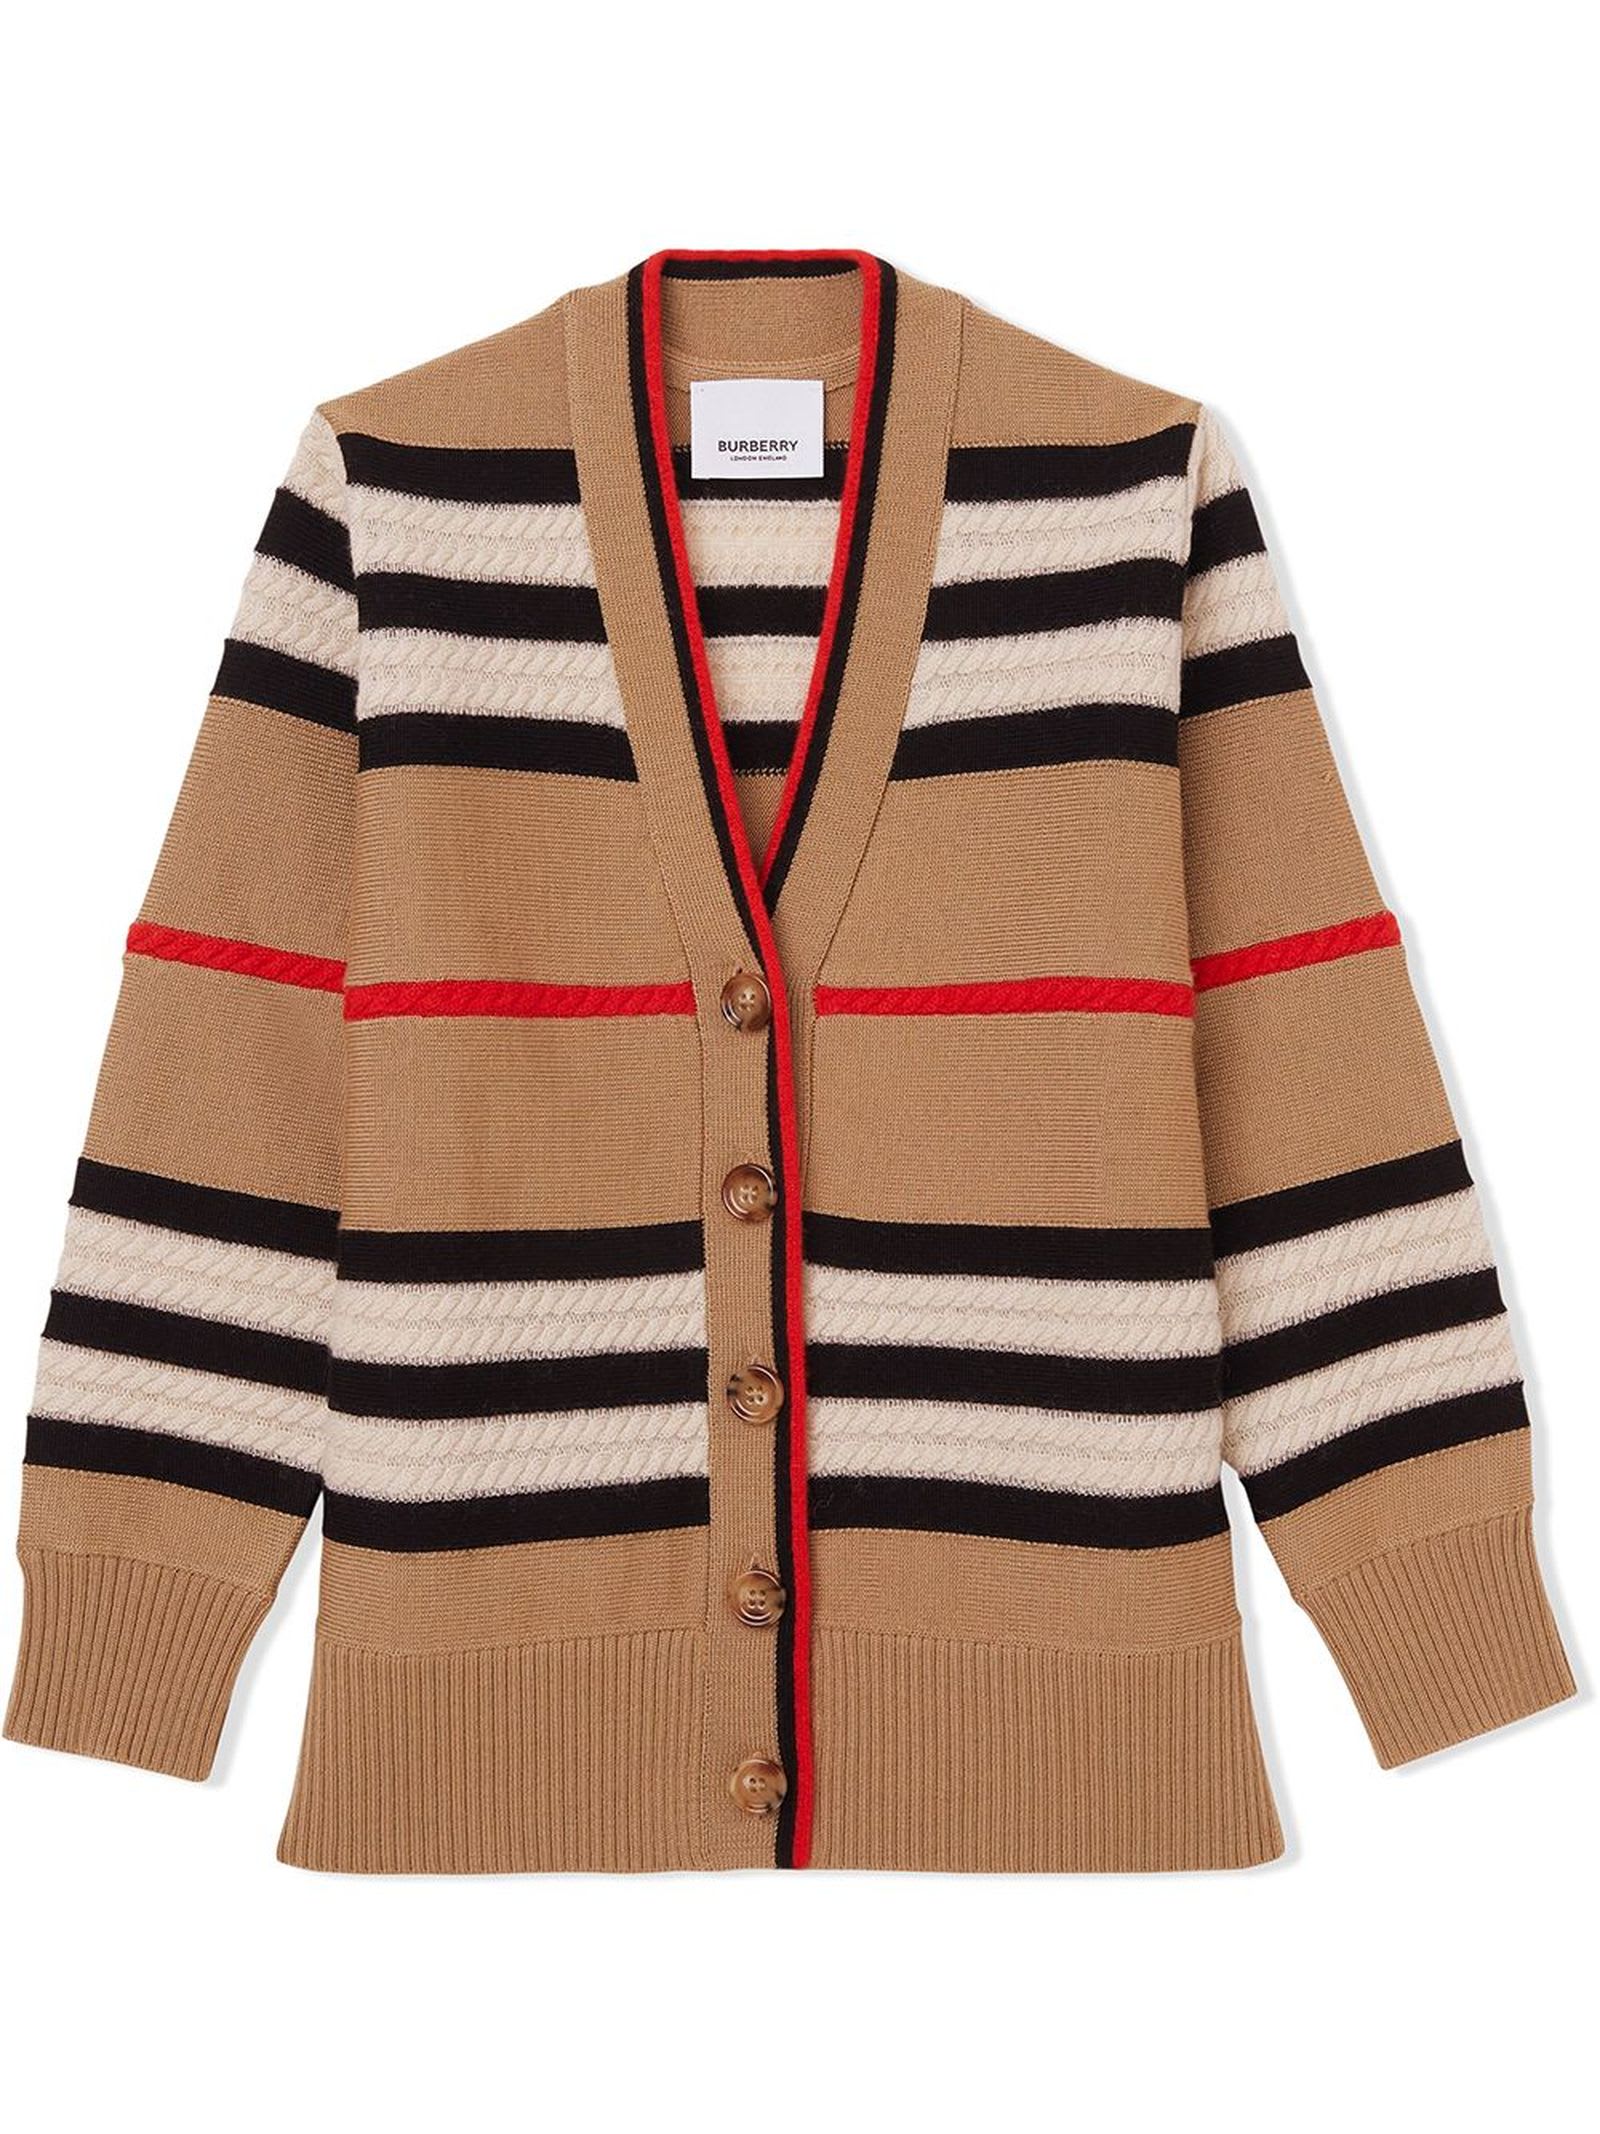 Burberry Beige Cashmere And Wool Cardigan